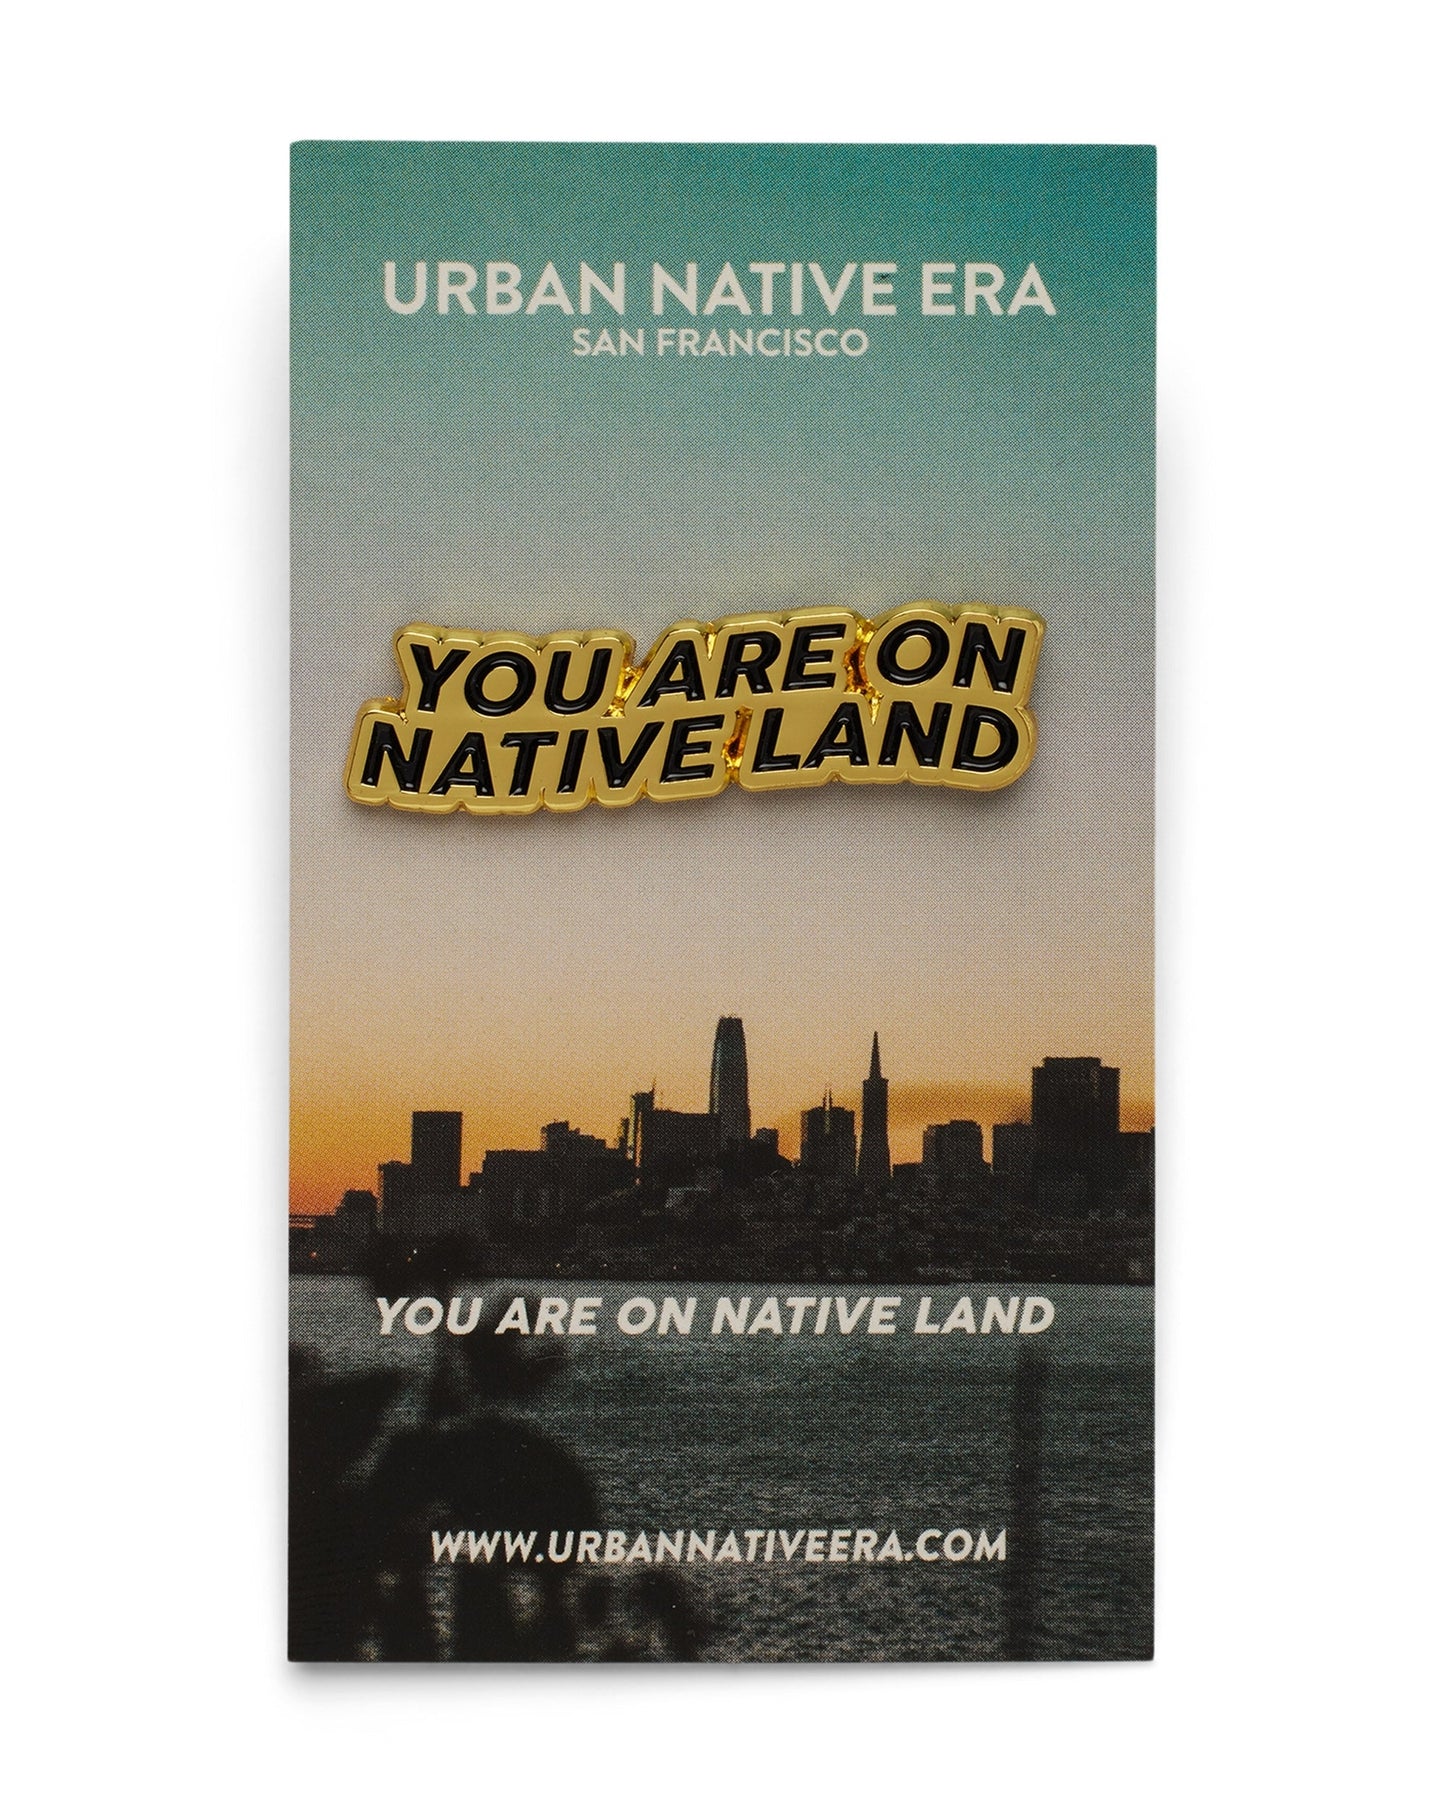 Native Urban Era's ‘You Are On Native Land’ pin is here for your daily fit! Something simple for your hat, jean jackets, backpacks, and other accessories. The statement ignites conversation, shows solidarity, and gives your outfit a purpose. Indigenously designed and made in the U.S.